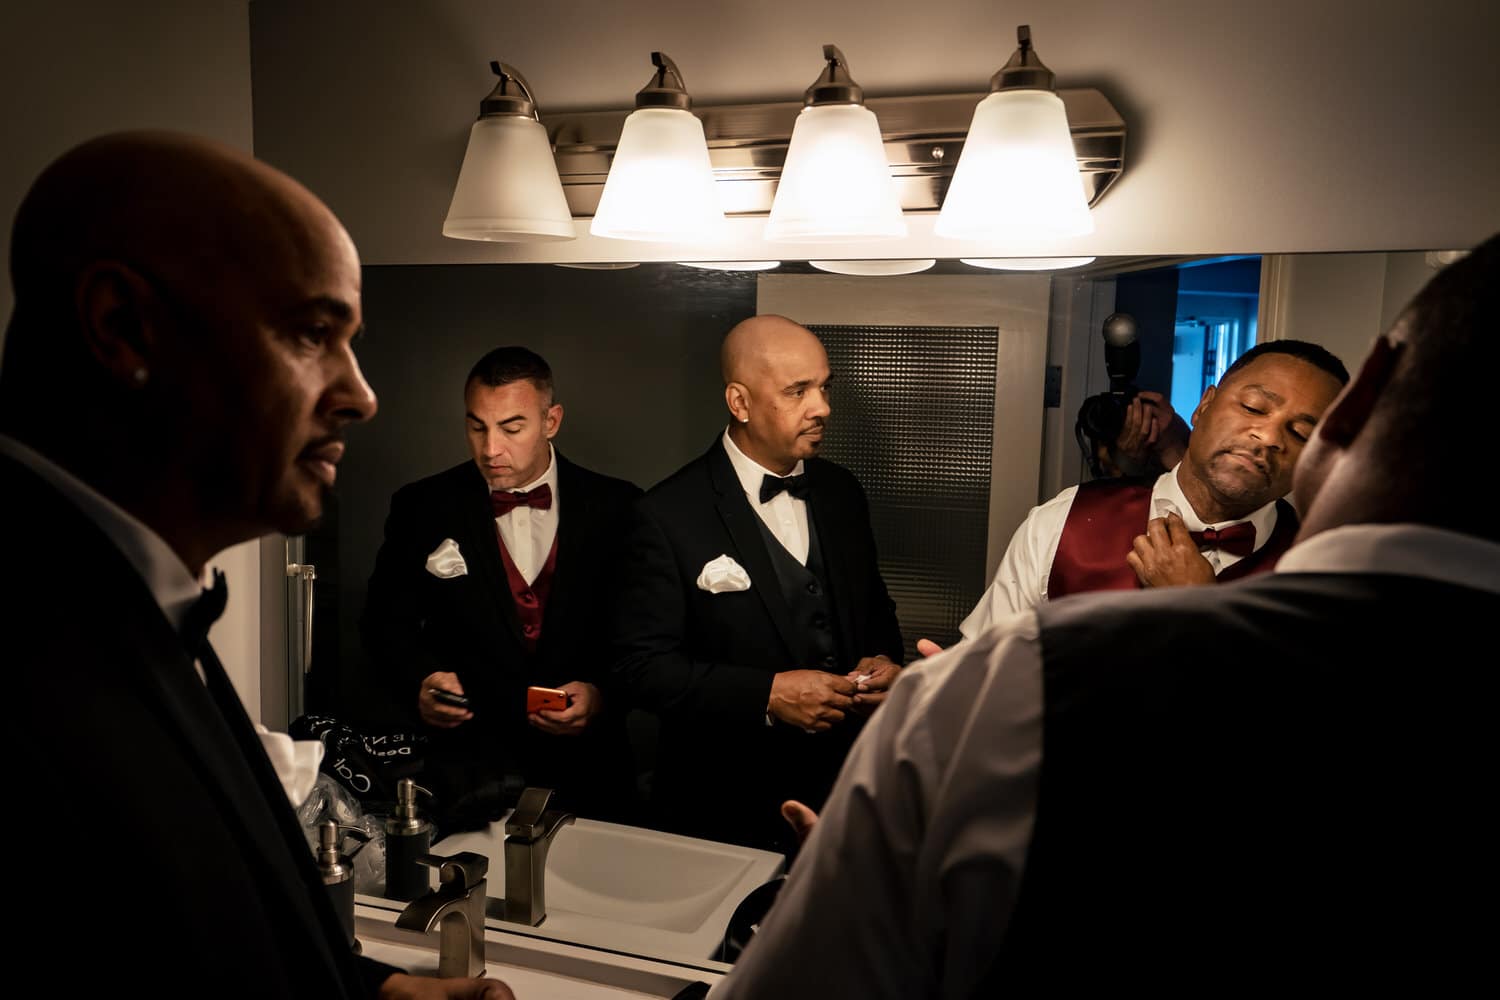 A candid picture of a group of men getting ready for a wedding in front of a large bathroom mirror. 